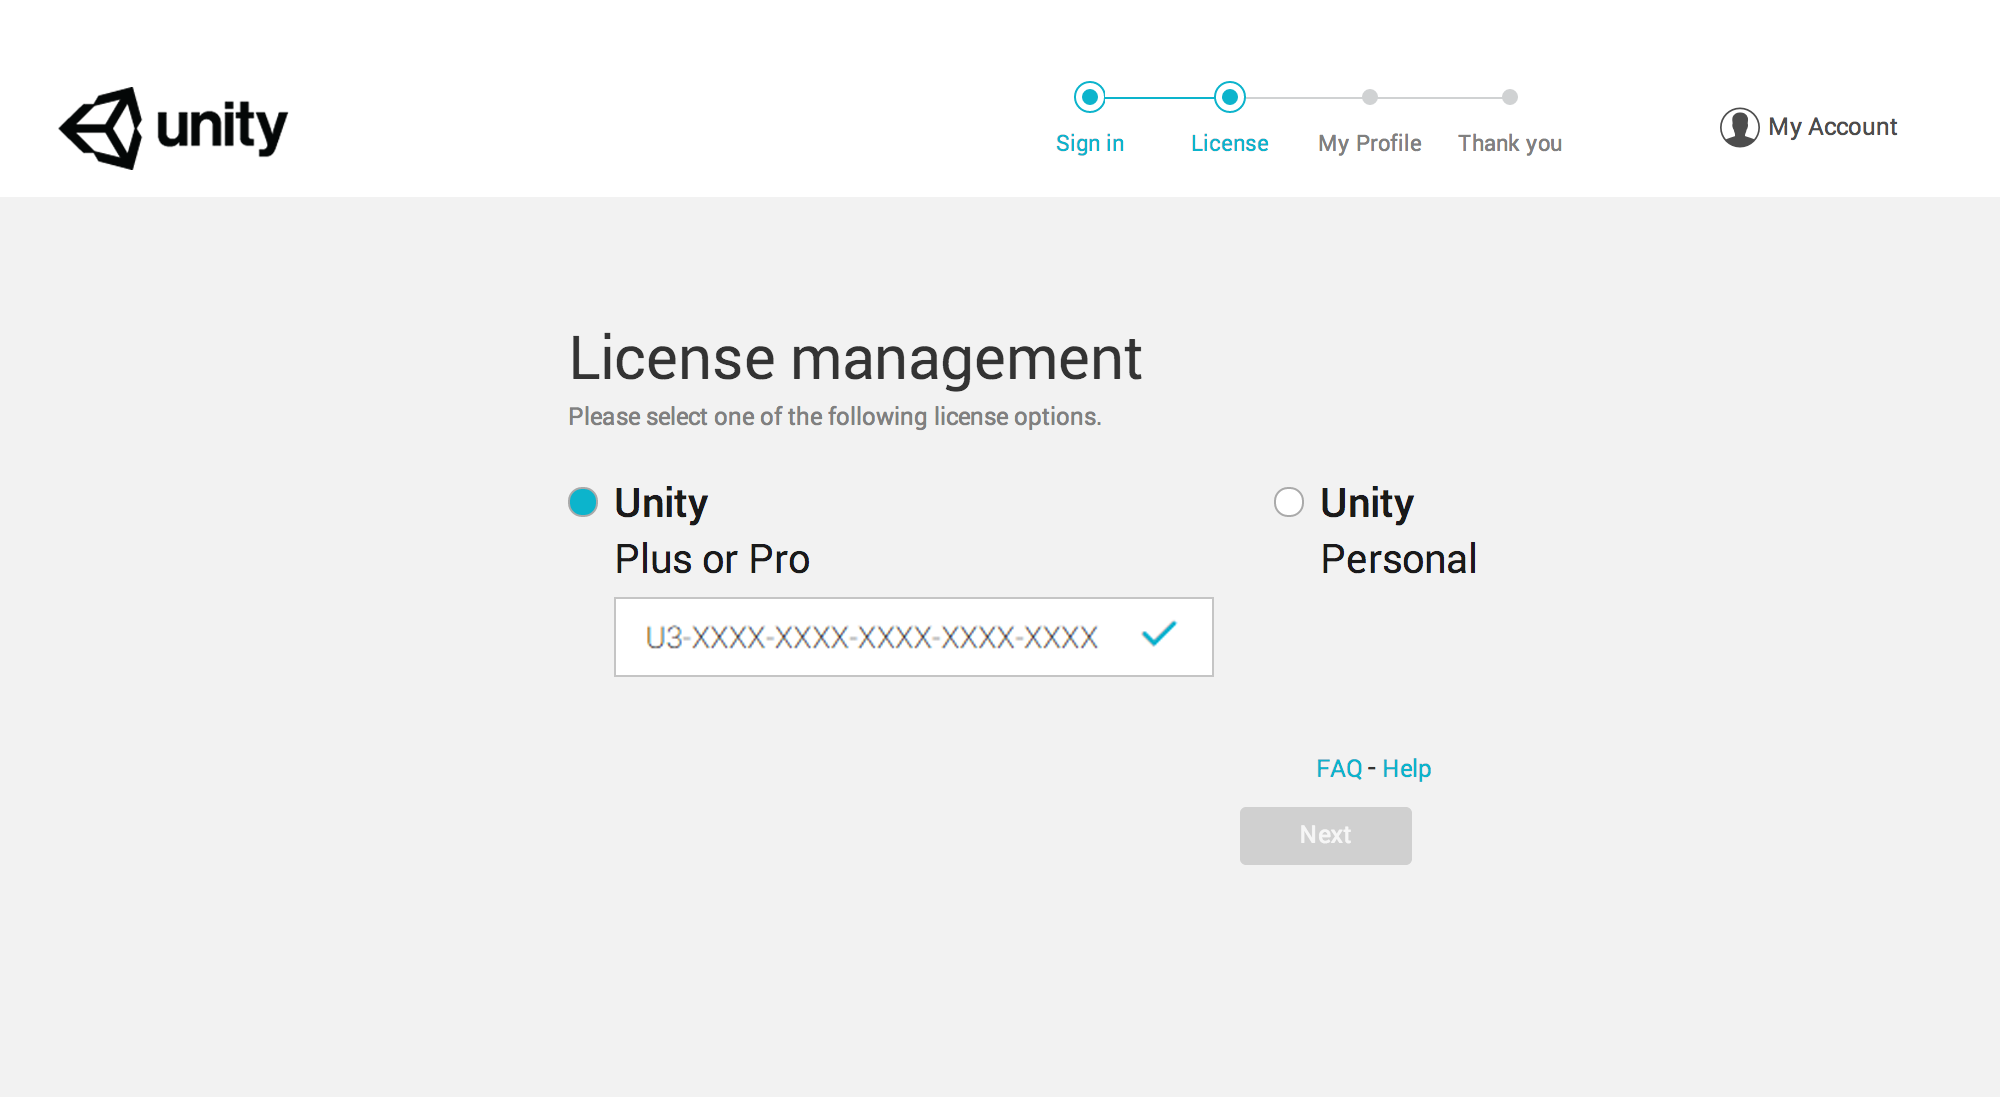 The License management window